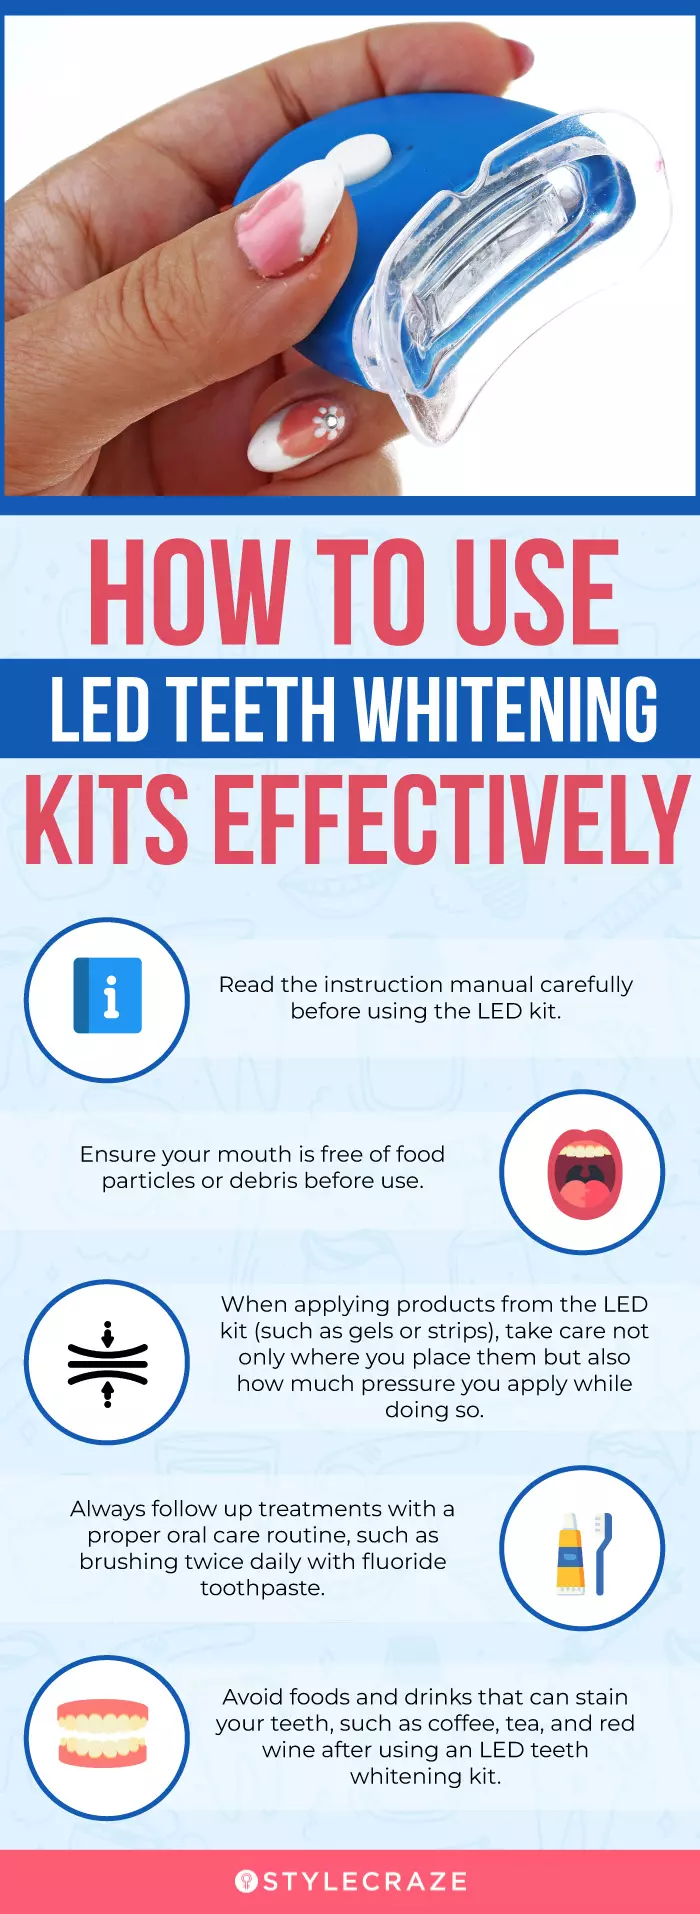 Tips To Use LED Teeth Whitening Kits Effectively (infographic)